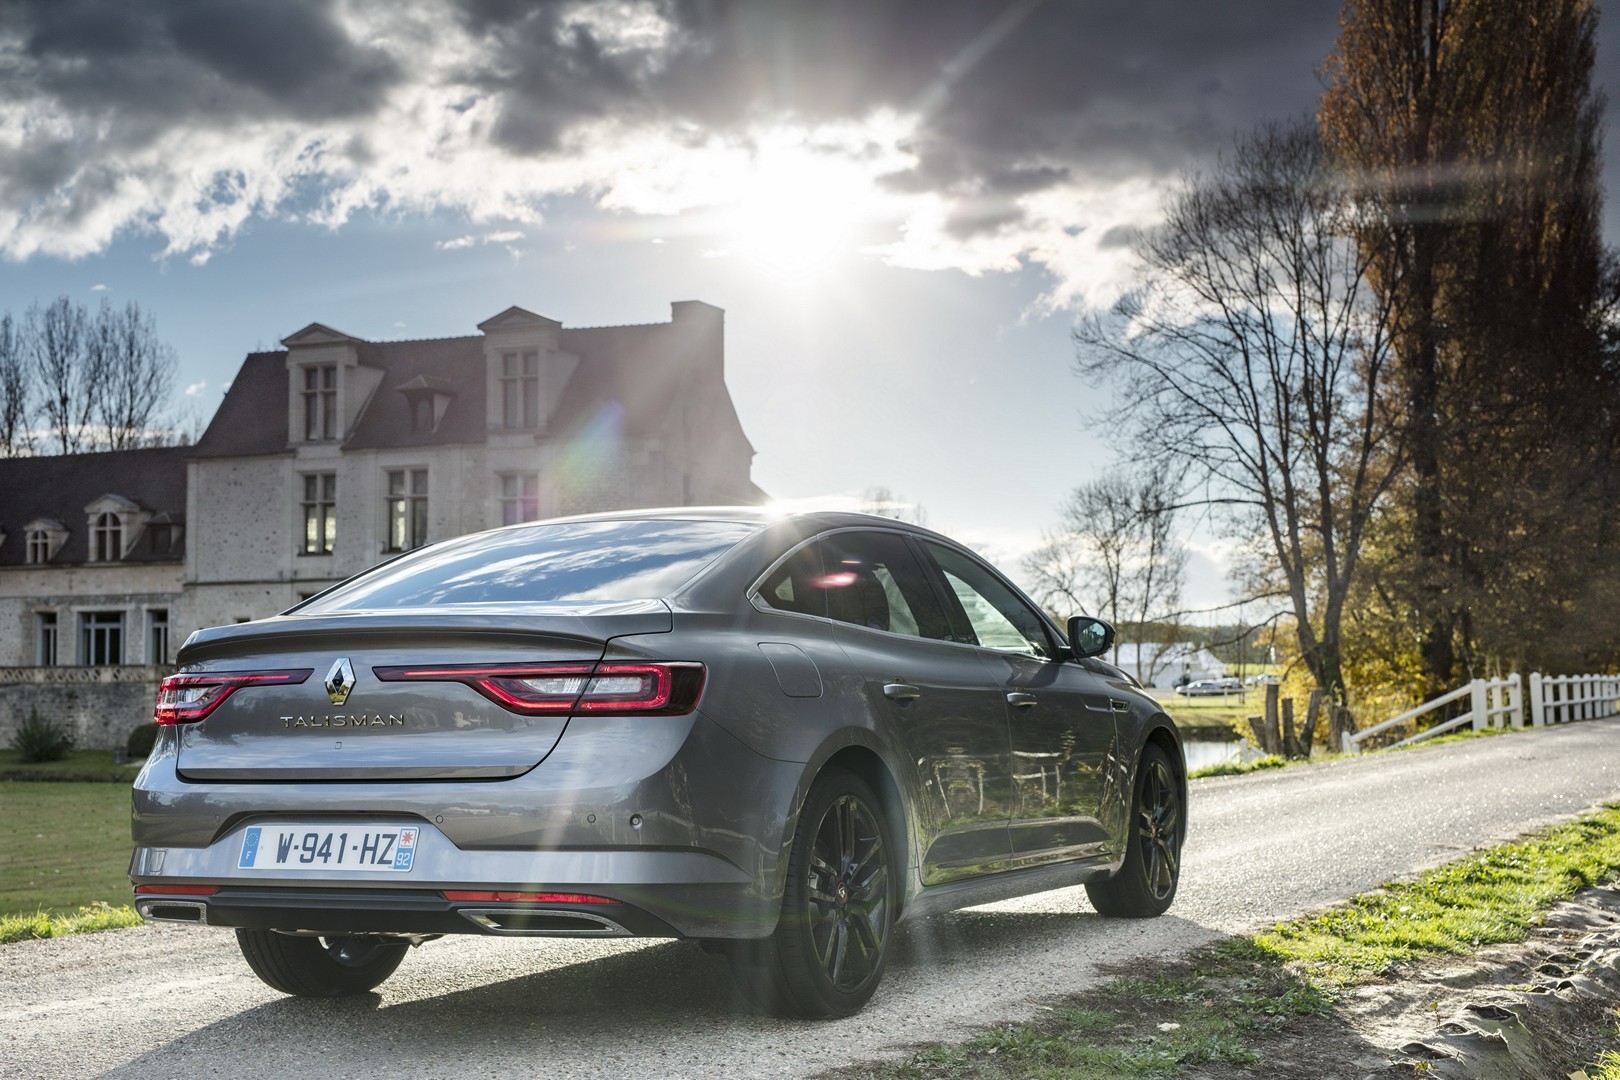 Renault Talisman S-Edition Has A New Megane RS-Sourced 1.8 Turbo